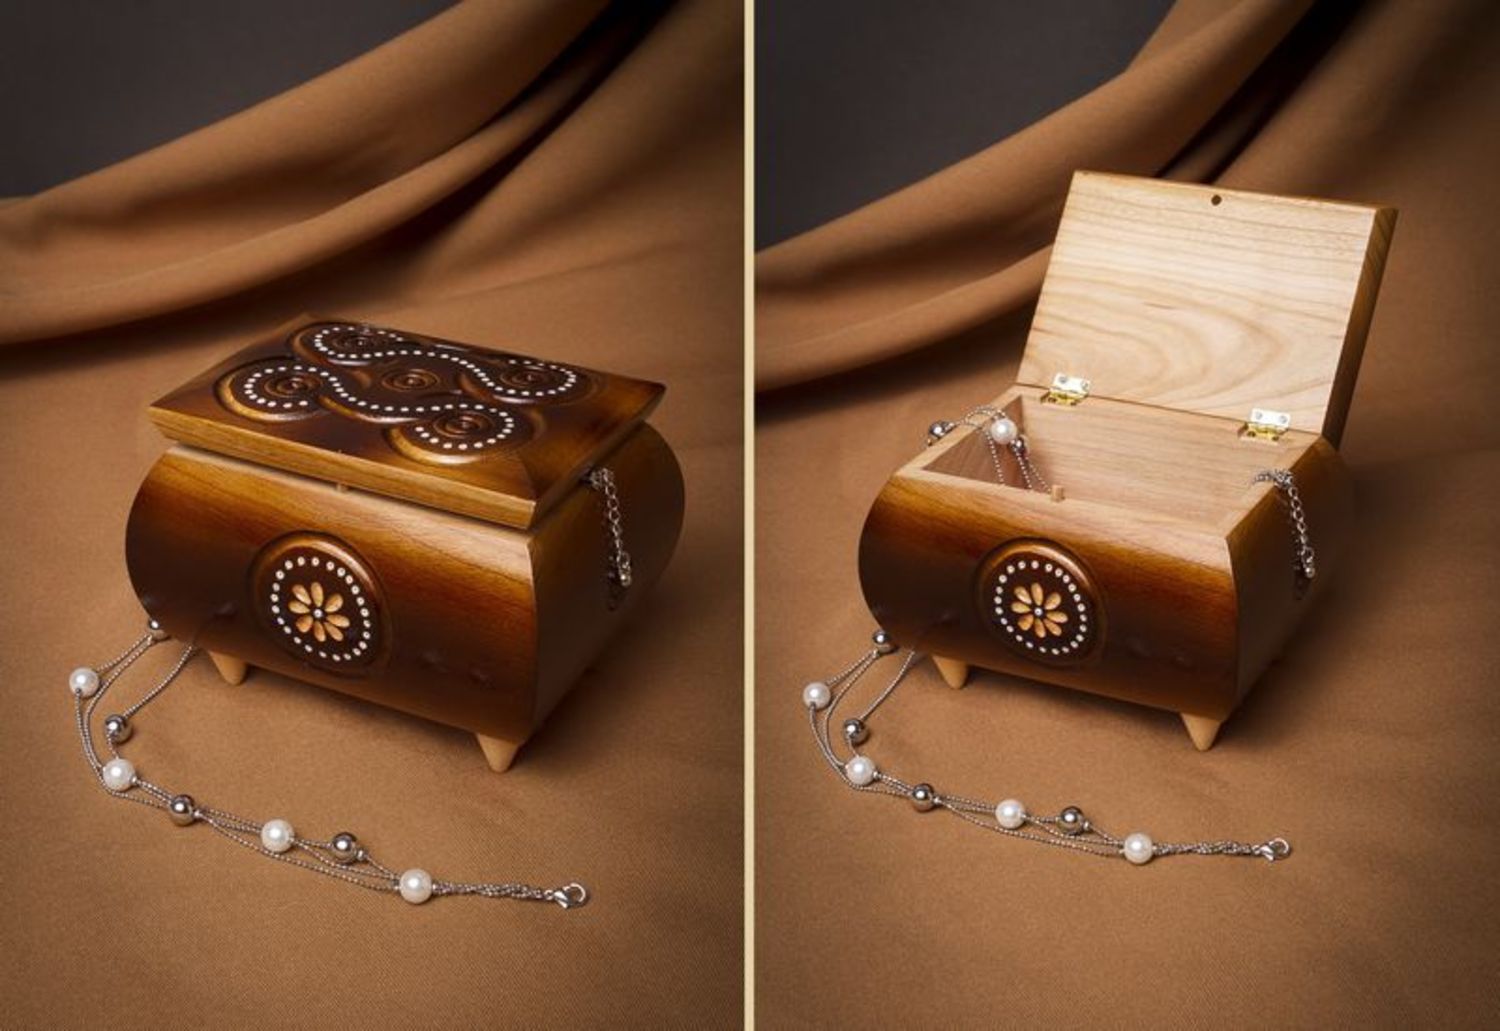 Wooden box with beads inlay photo 1